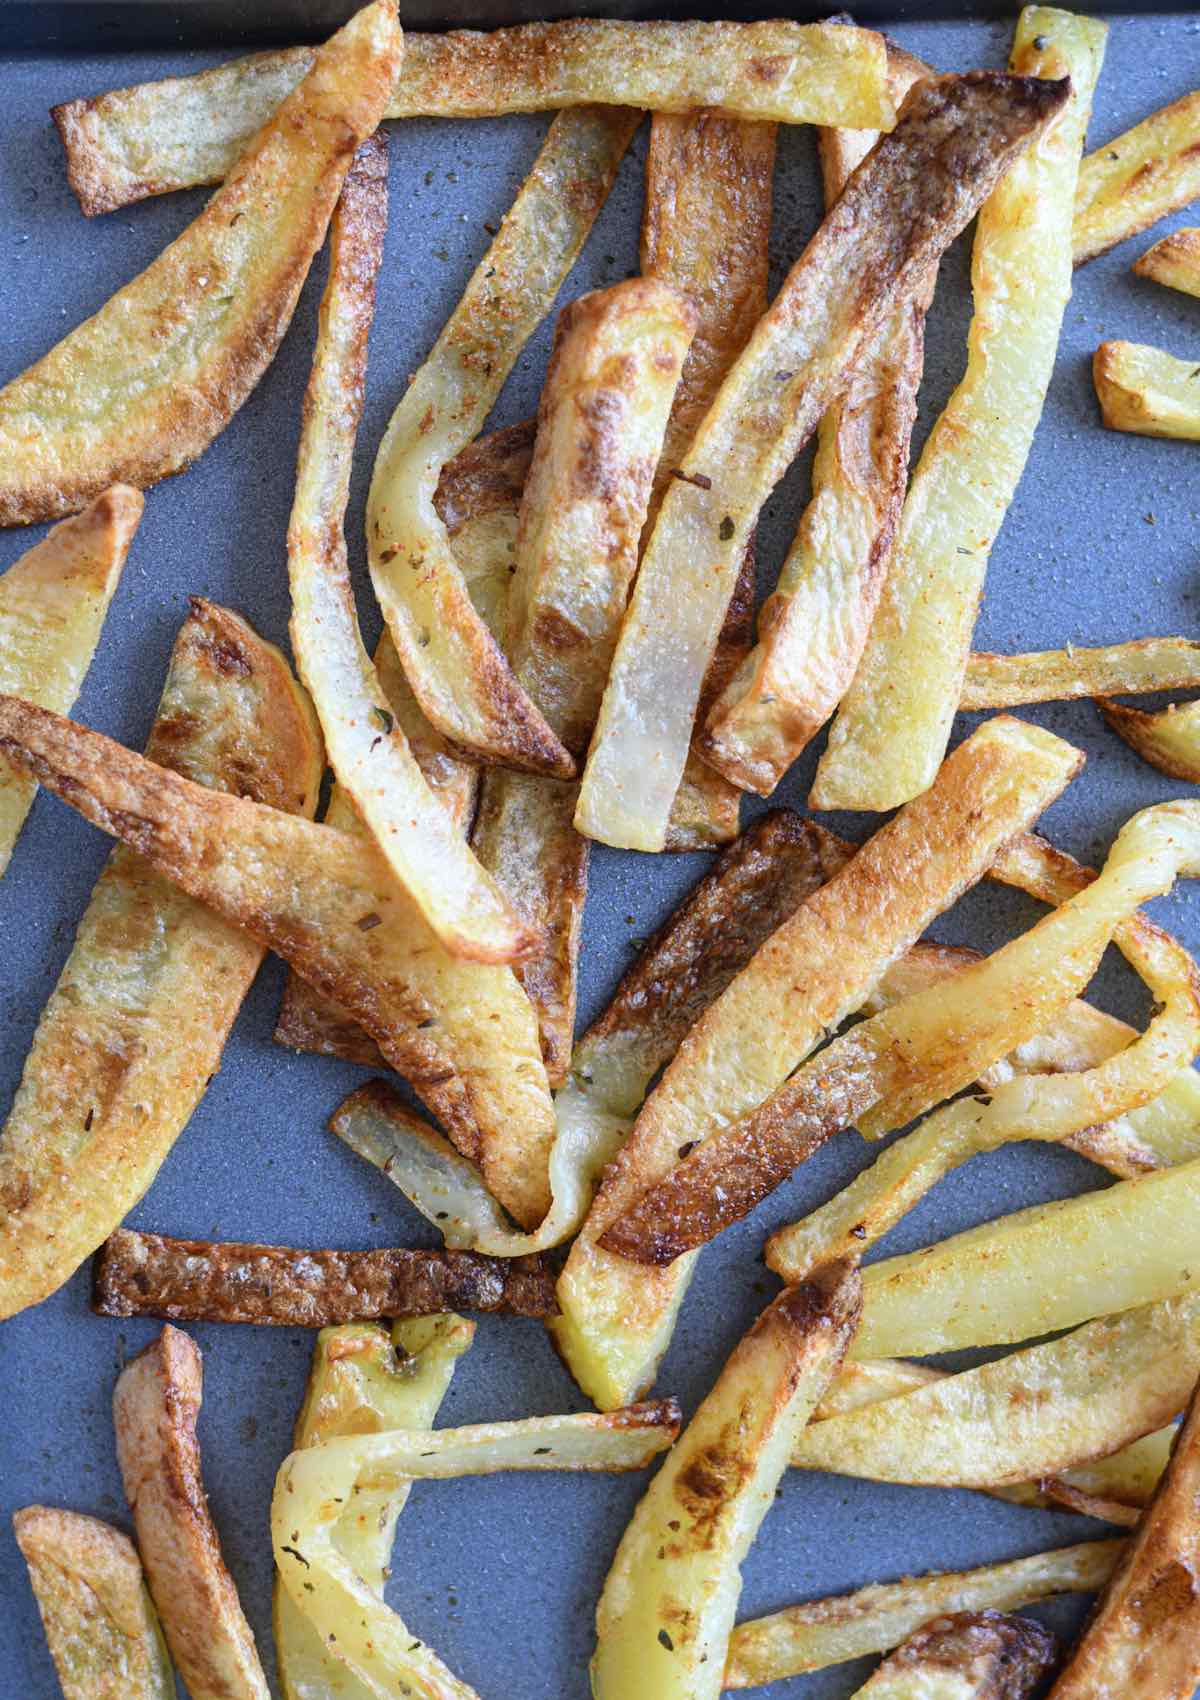 cooked fries on a baking sheet.